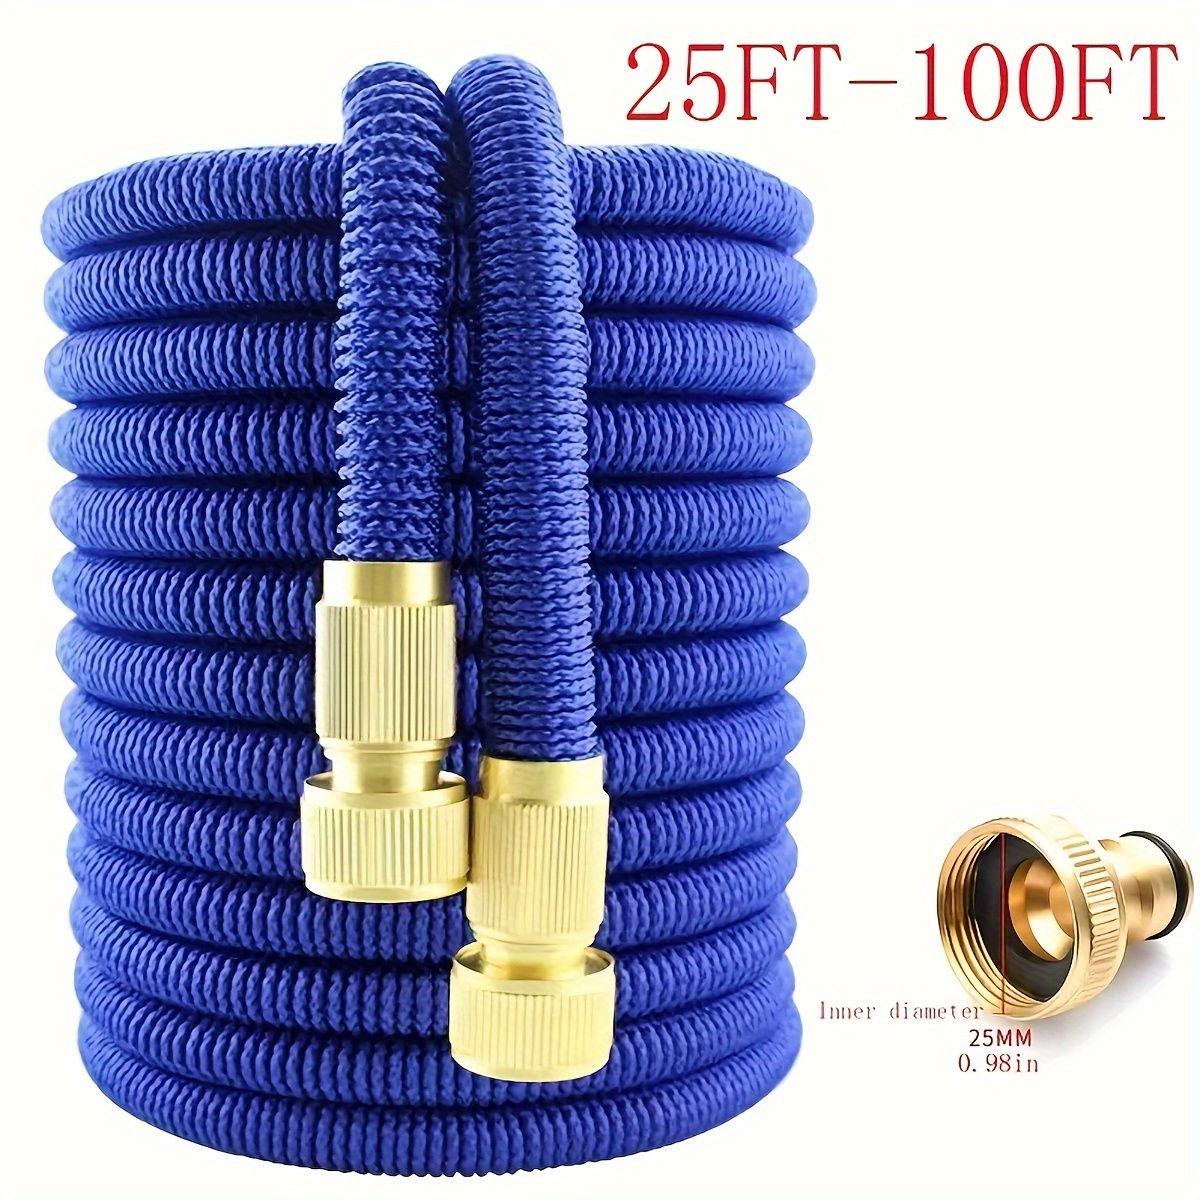 

Expandable Garden Hose Set, Polyurethane With High Strength Polyester Silk, Tpe Inner Layer, Includes Copper Connectors - Eu Standard, 3 Times Telescopic Multi-length Options - 25ft, 50ft, 75ft, 100ft